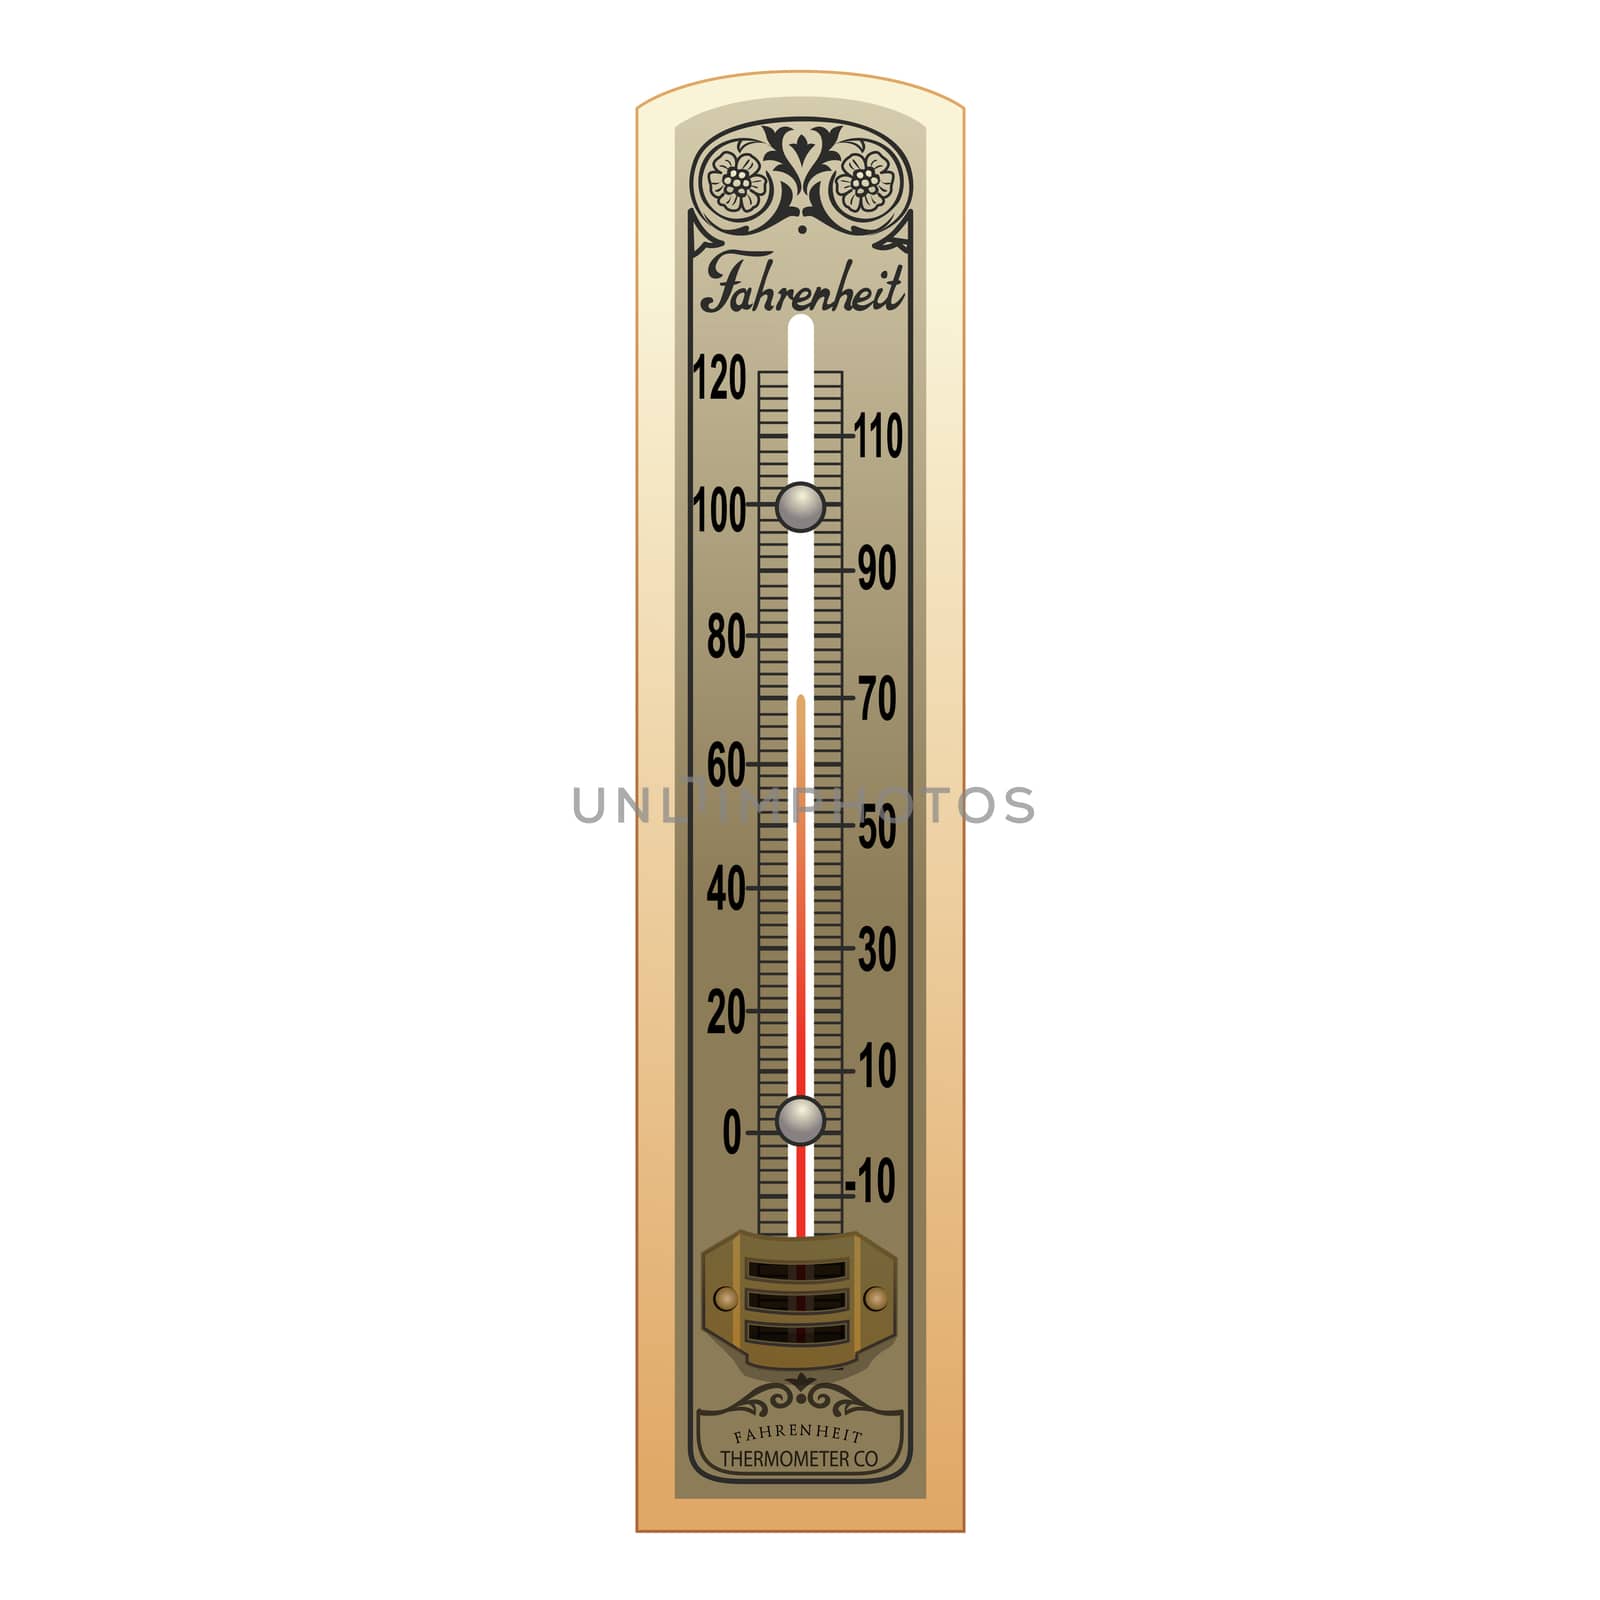 Old thermometer  illustration on a white background